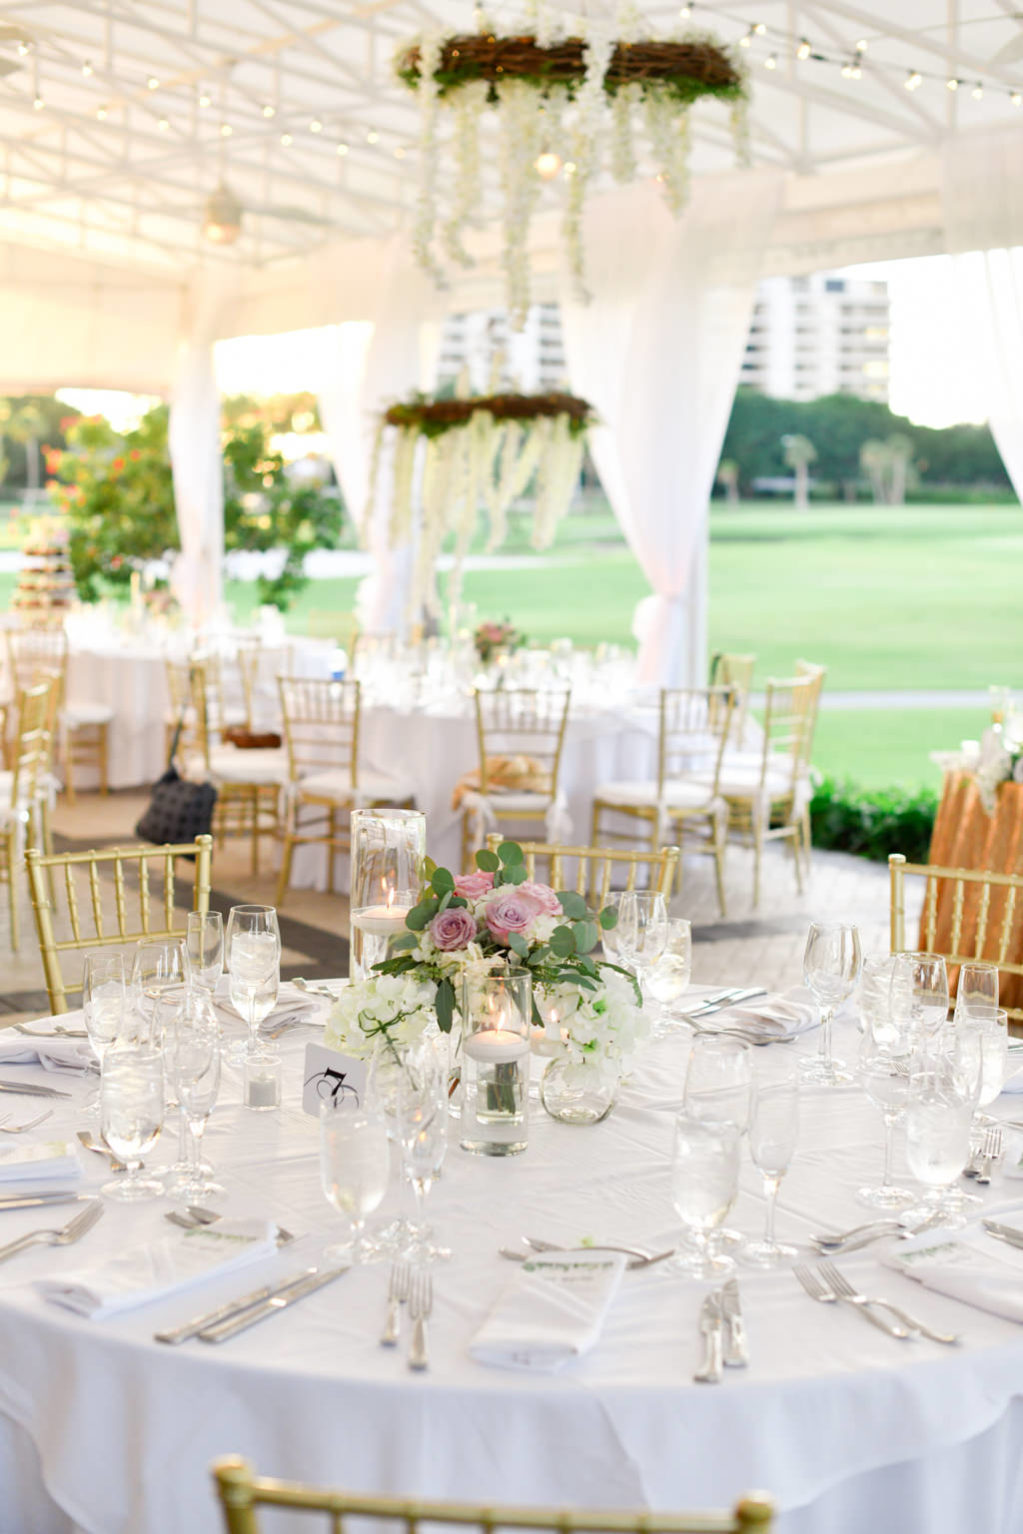 Tropical, Classy Elegant Wedding Reception Decor, Round Tables with White Tablecloths, Gold Chiavari Chairs, Low Purple, Greenery Floral Centerpieces | Sarasota Wedding Venue The Resort at Longboat Key Club